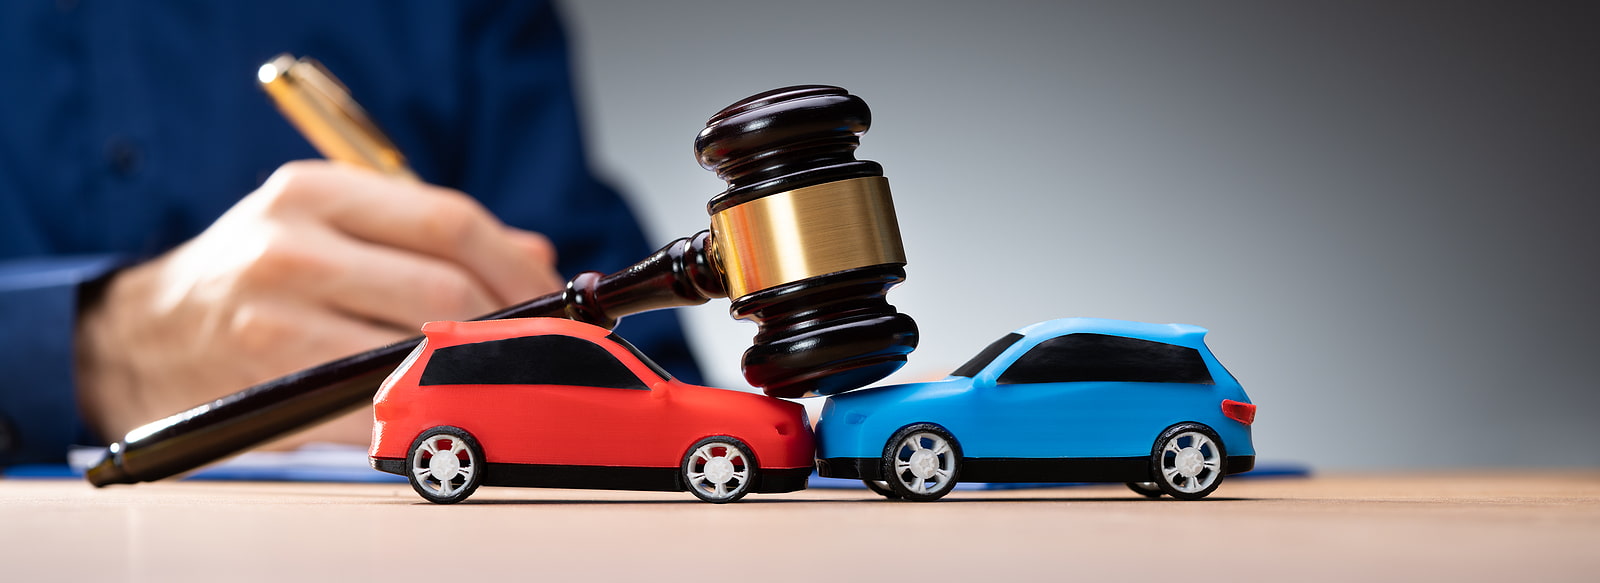 Choosing The Right Car Accident Lawyer In Memphis, TN: Factors To Consider 